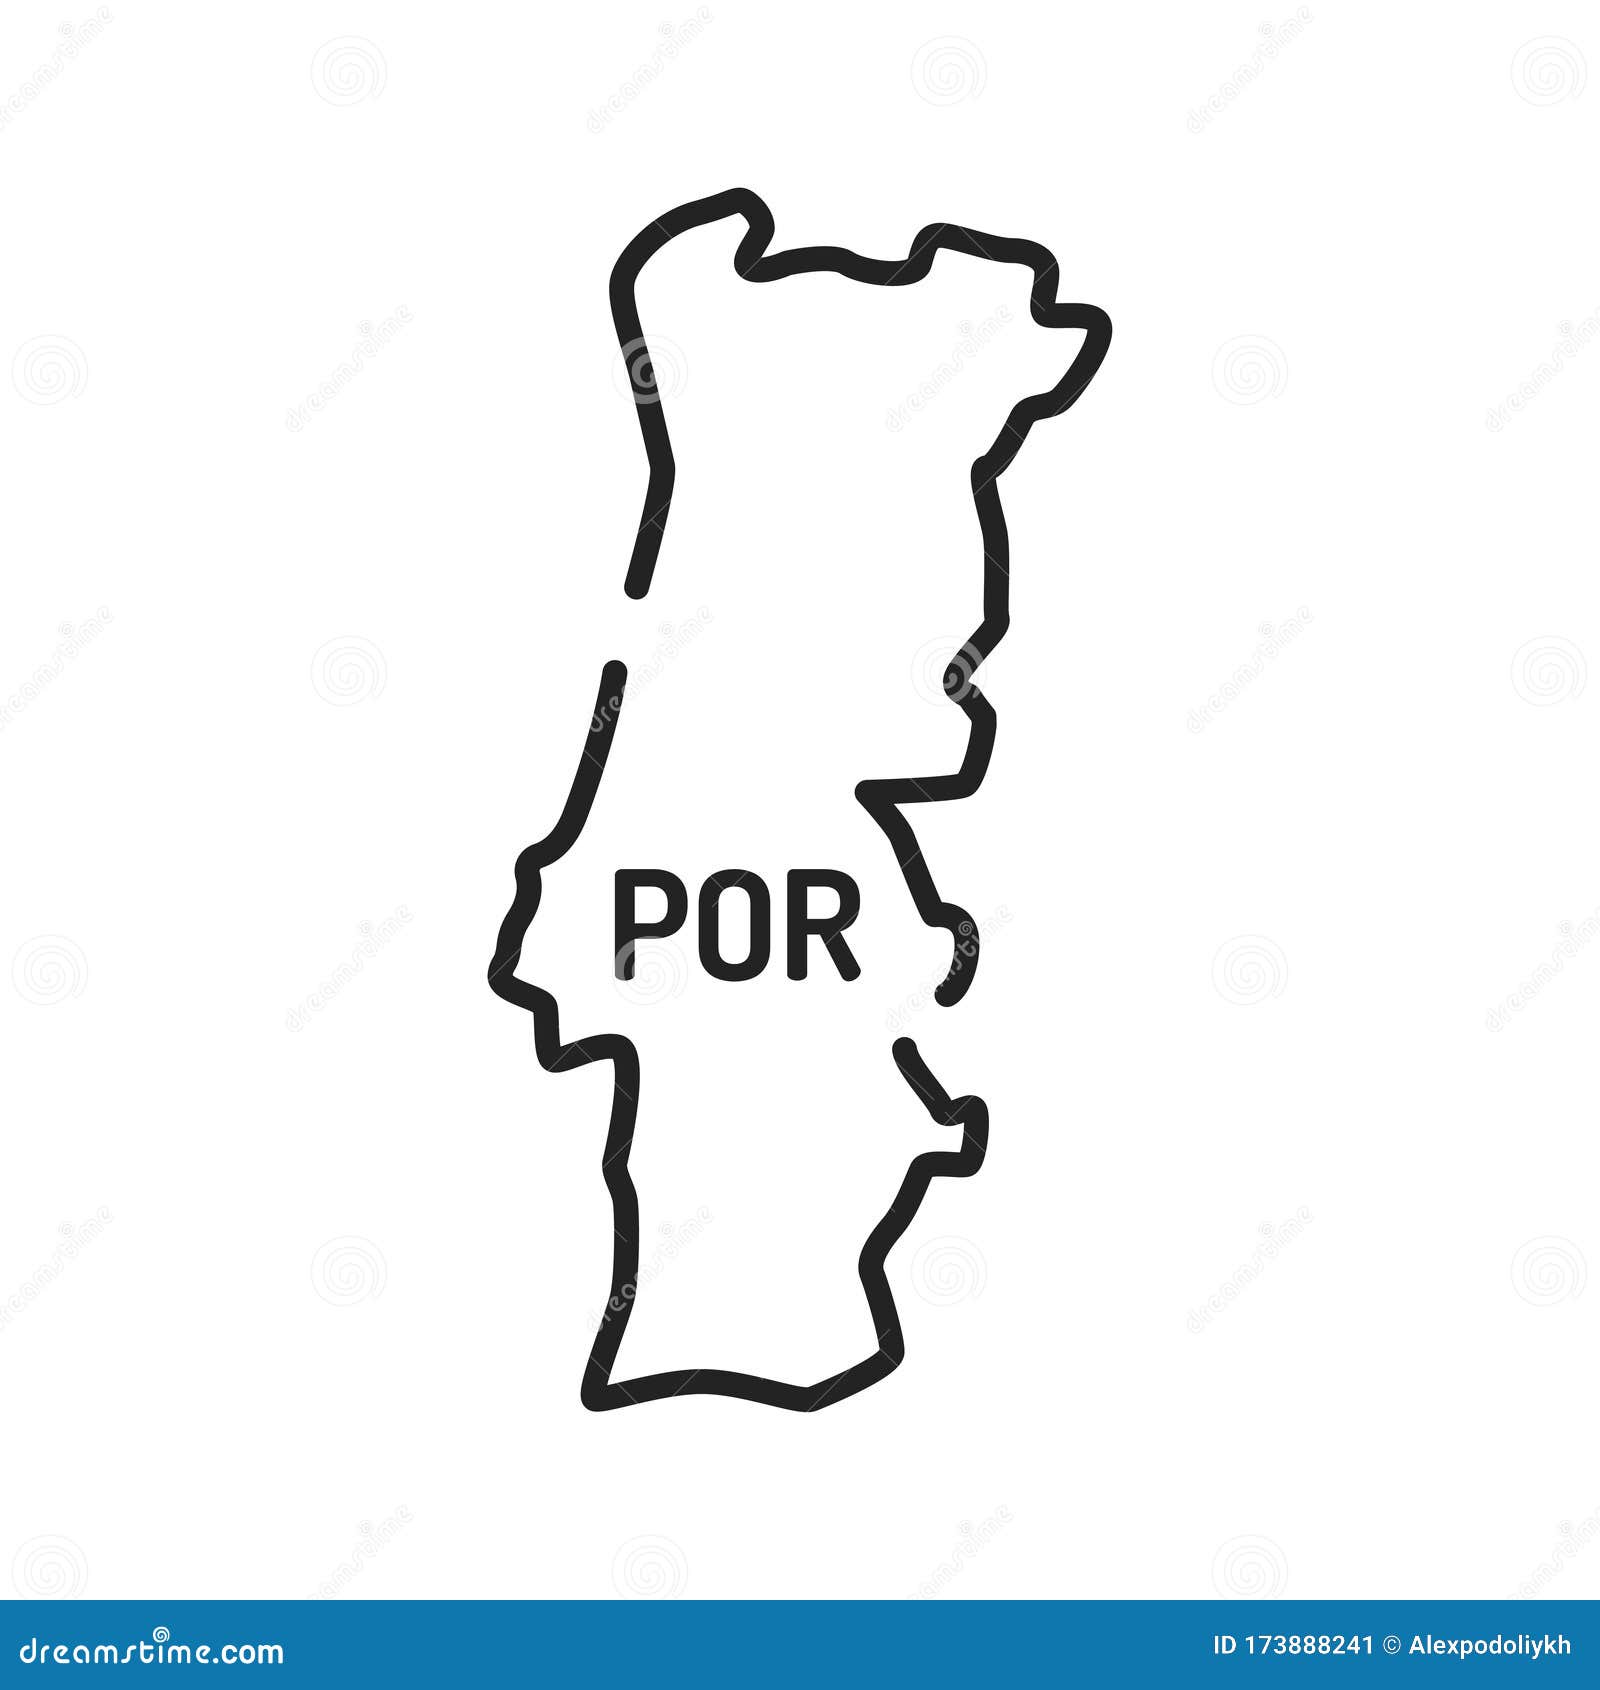 Portugal - Free maps and location icons